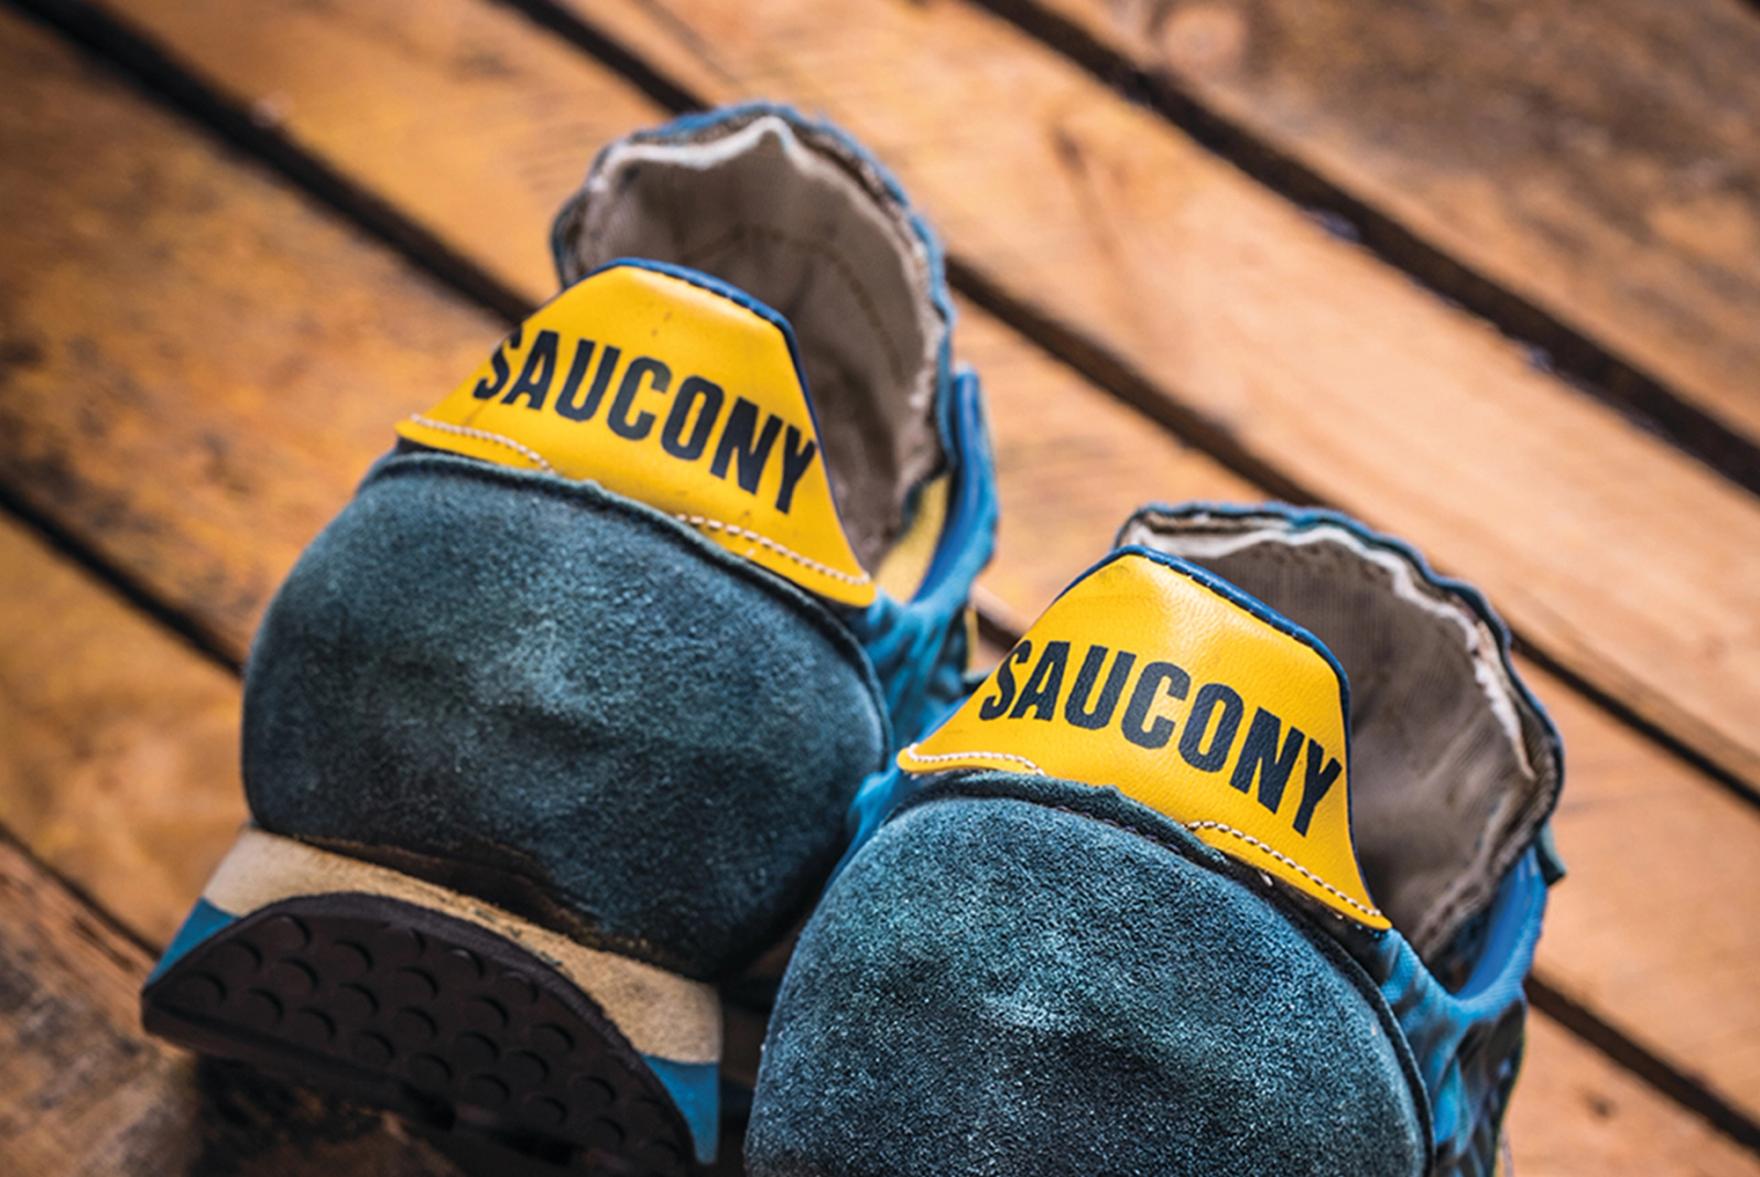 Saucony Through the Ages Header